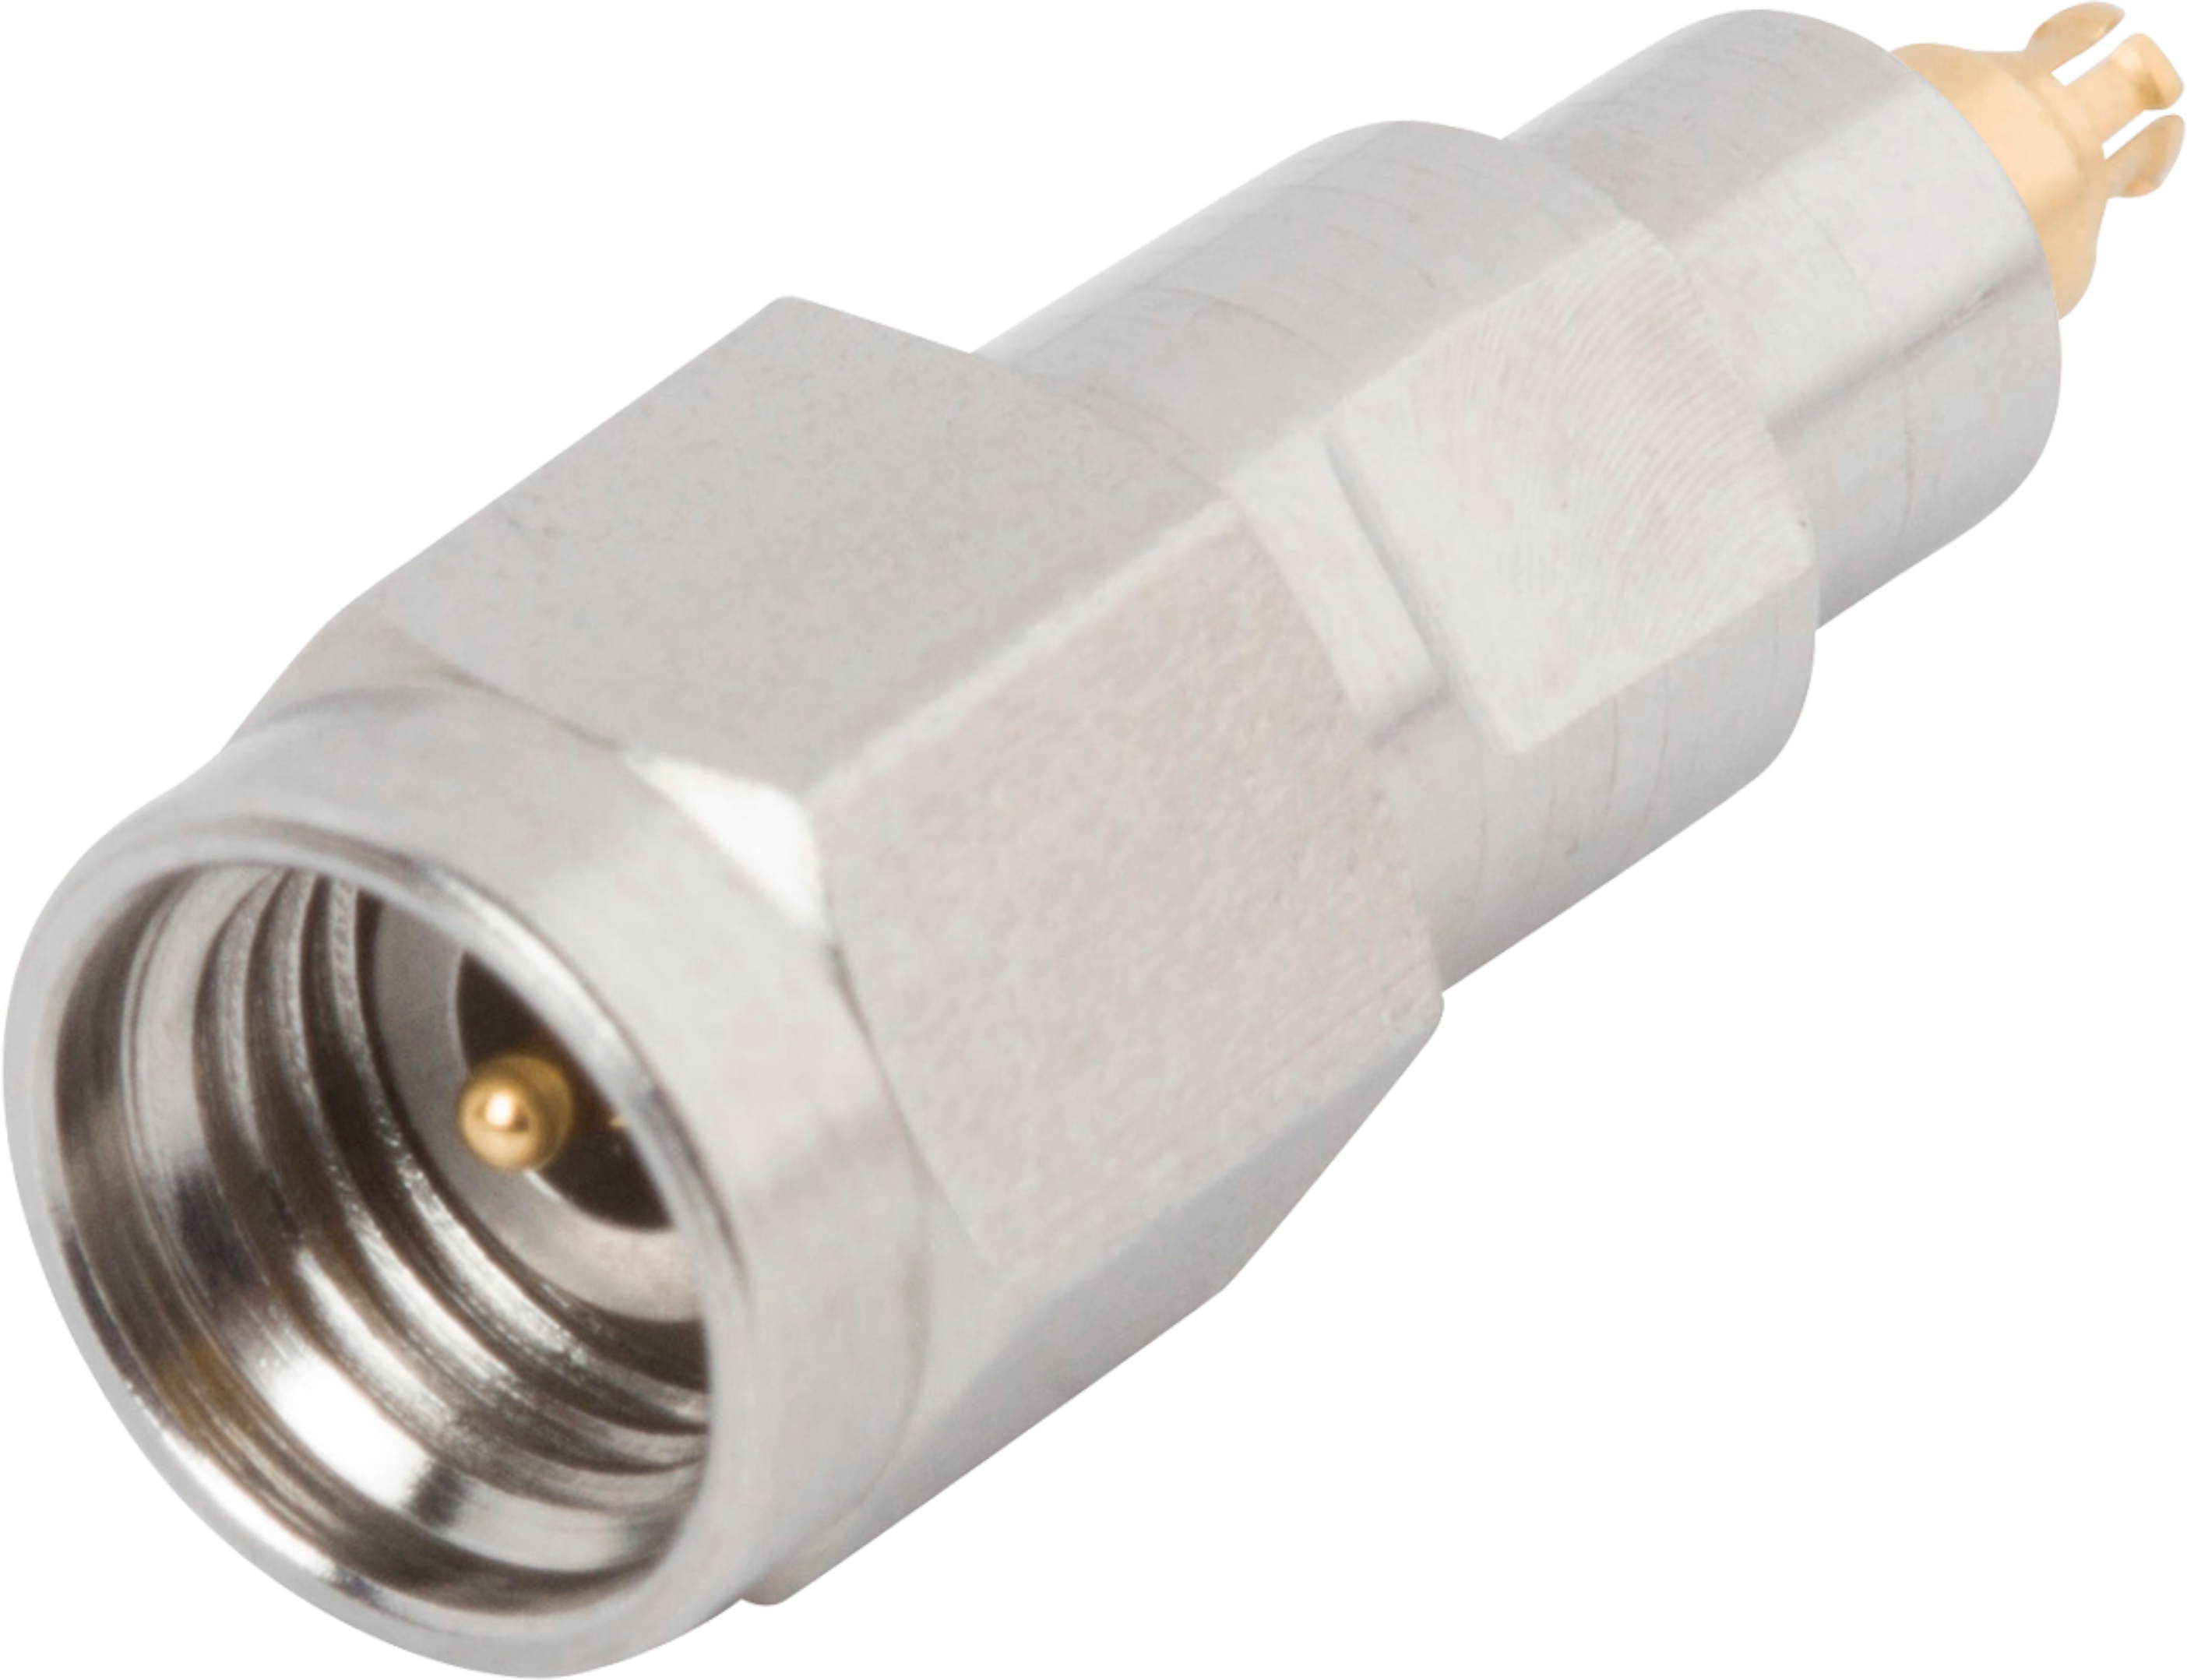 2.92mm Male to SMPS Female Adapter, SF1115-6091